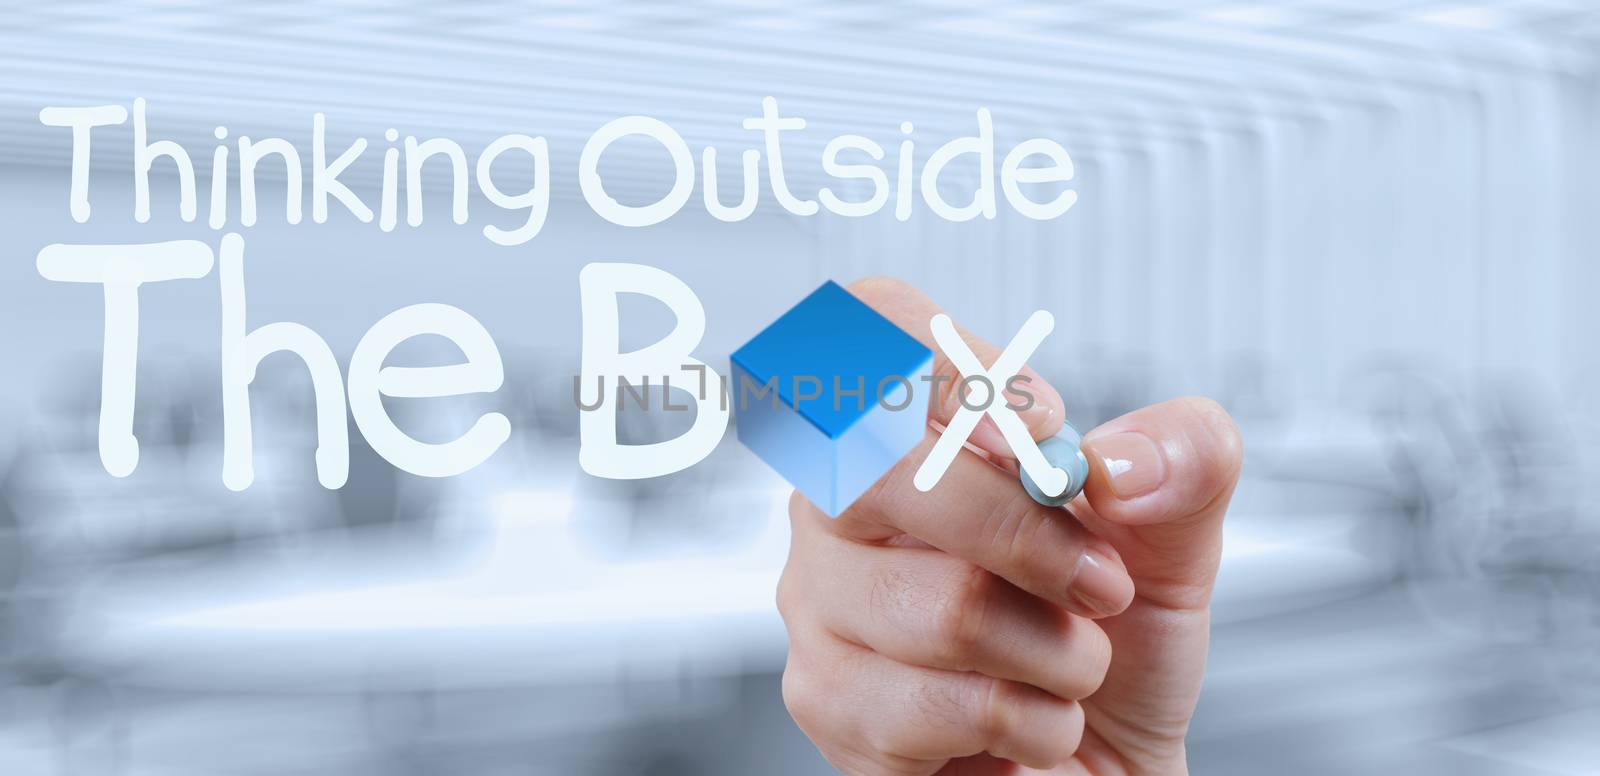 thinking outside the box as concept  by everythingpossible